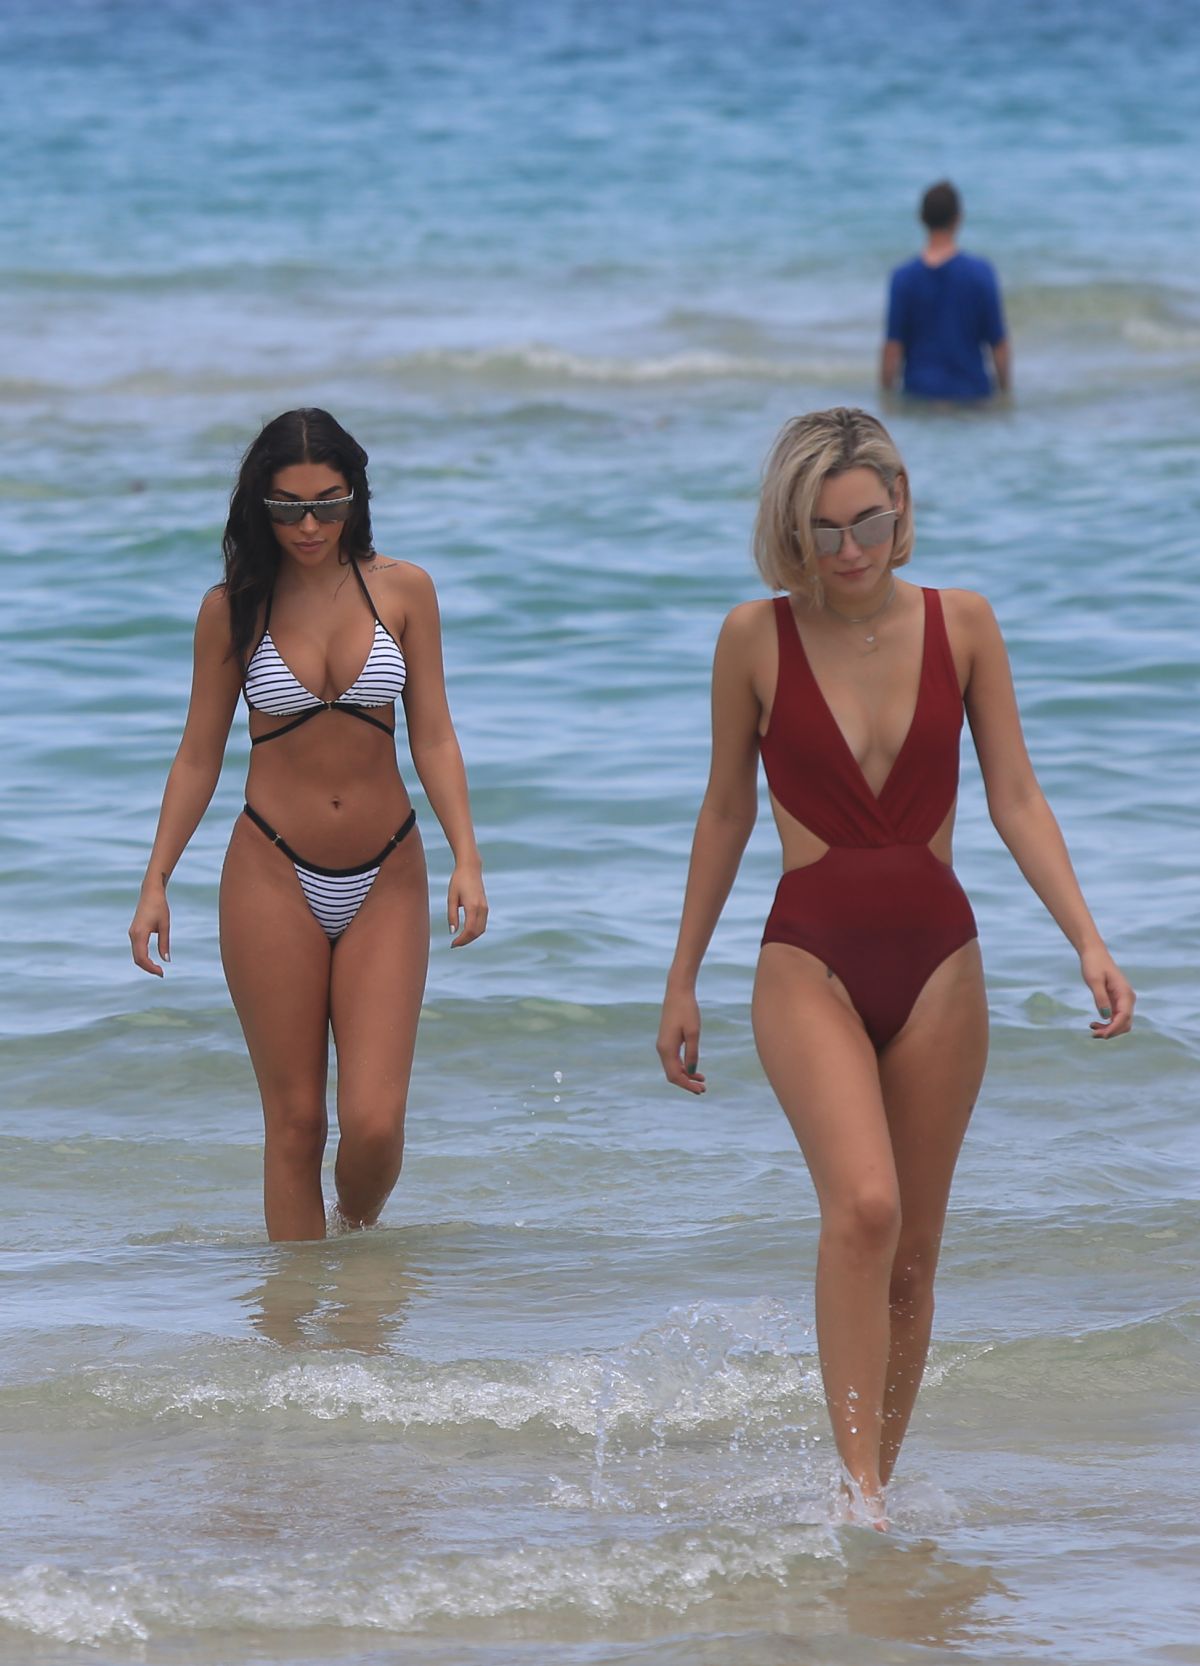 CHANTEL JEFFRIES and SARAH SNYDER on the Beach in Miami 07/22/2017.